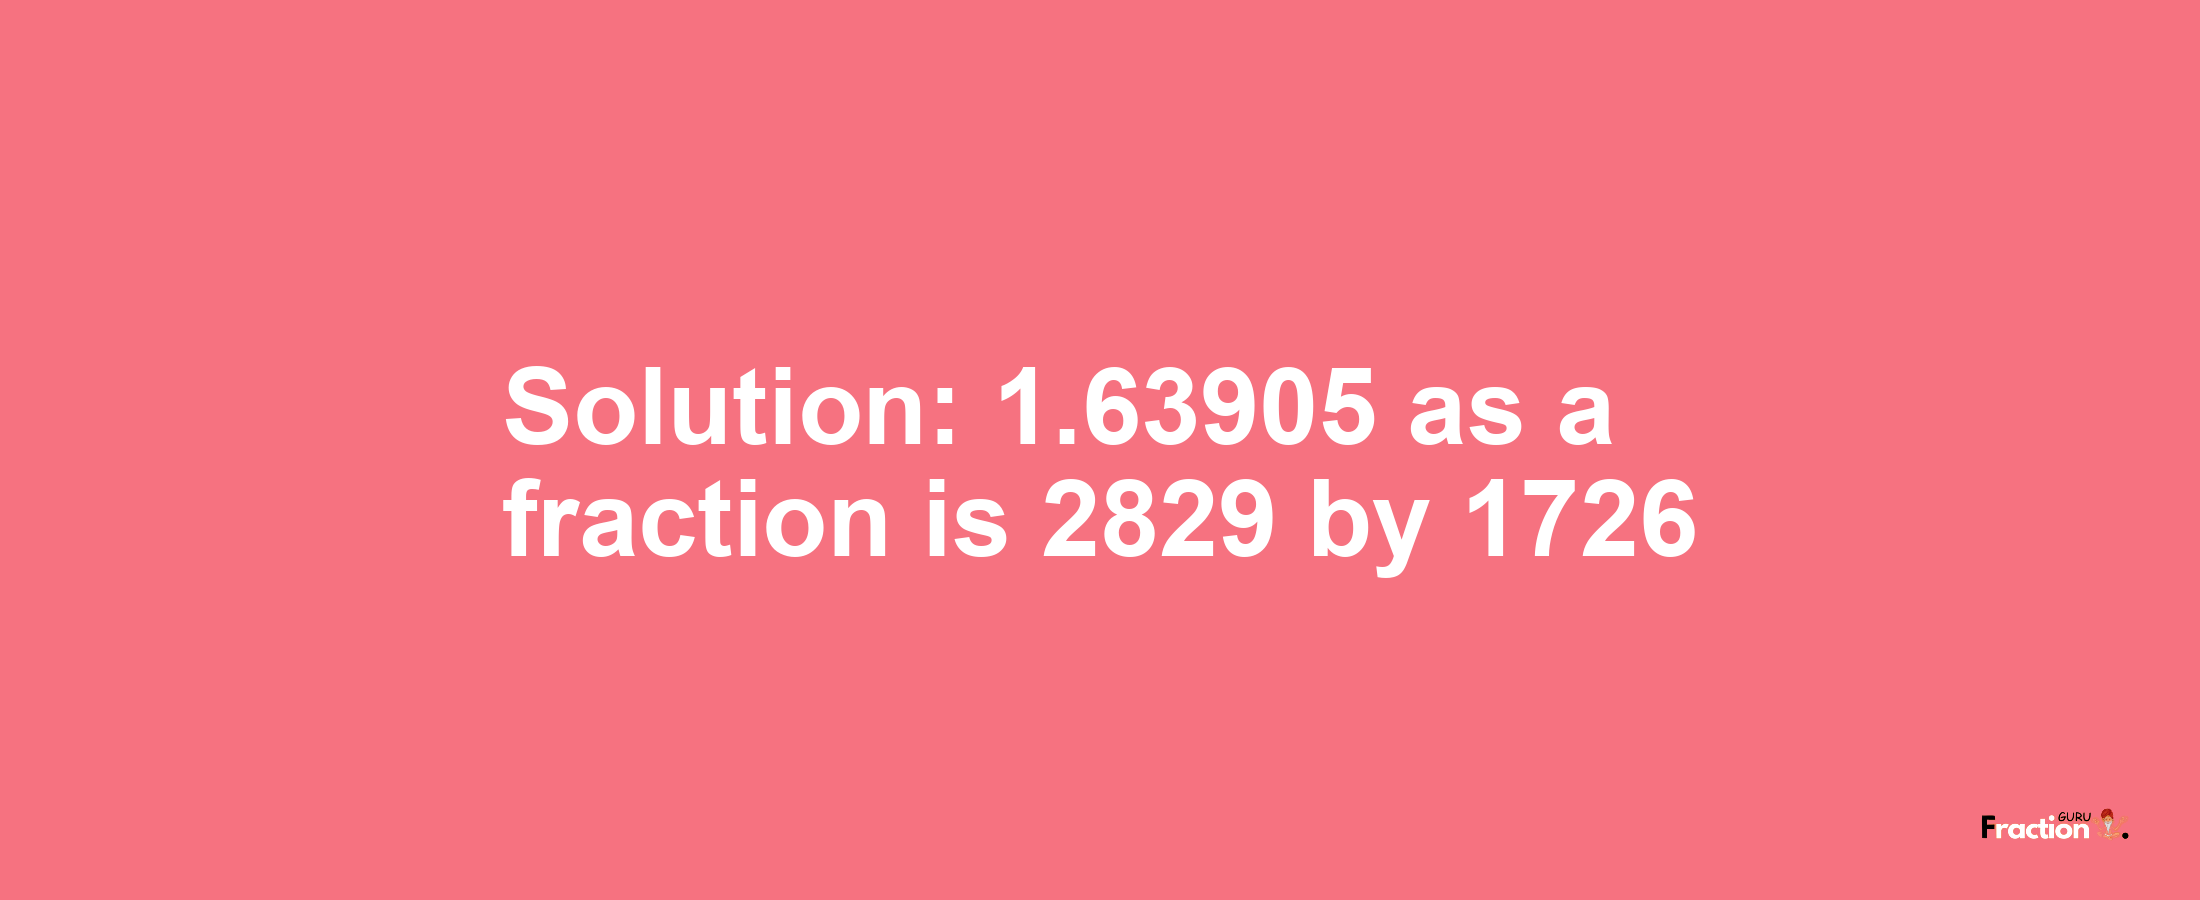 Solution:1.63905 as a fraction is 2829/1726